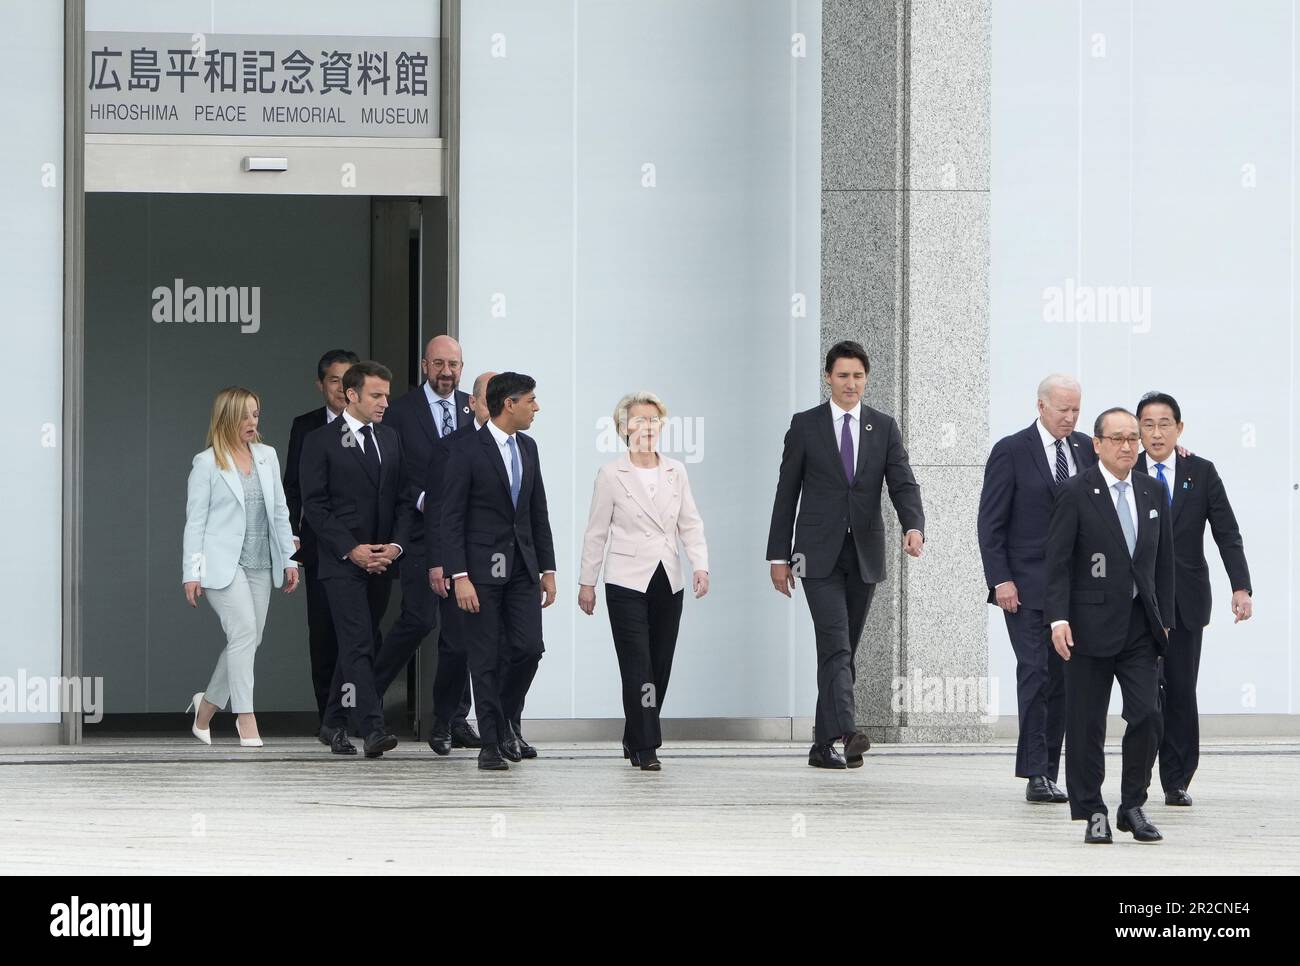 May 19, 2023, Hiroshima, Japan: (L-R) Italian Prime Minister Giorgia Meloni, an unidentified official, French President Emmanuel Macron, European Council President Charles Michel, German Chancellor Olaf Scholz, British Prime Minister Rishi Sunak, European Commission President Ursula von der Leyen, Canadian Prime Minister Justin Trudeau, US President Joe Biden, Mayor of Hiroshima Kazumi Matsui and Japan's Prime Minister Fumio Kishida walk out of the Peace Memorial Museum to a flower wreath laying ceremony in the Peace Memorial Park as part of the G7 Hiroshima Summit in Hiroshima, Japan, 19 May Stock Photo